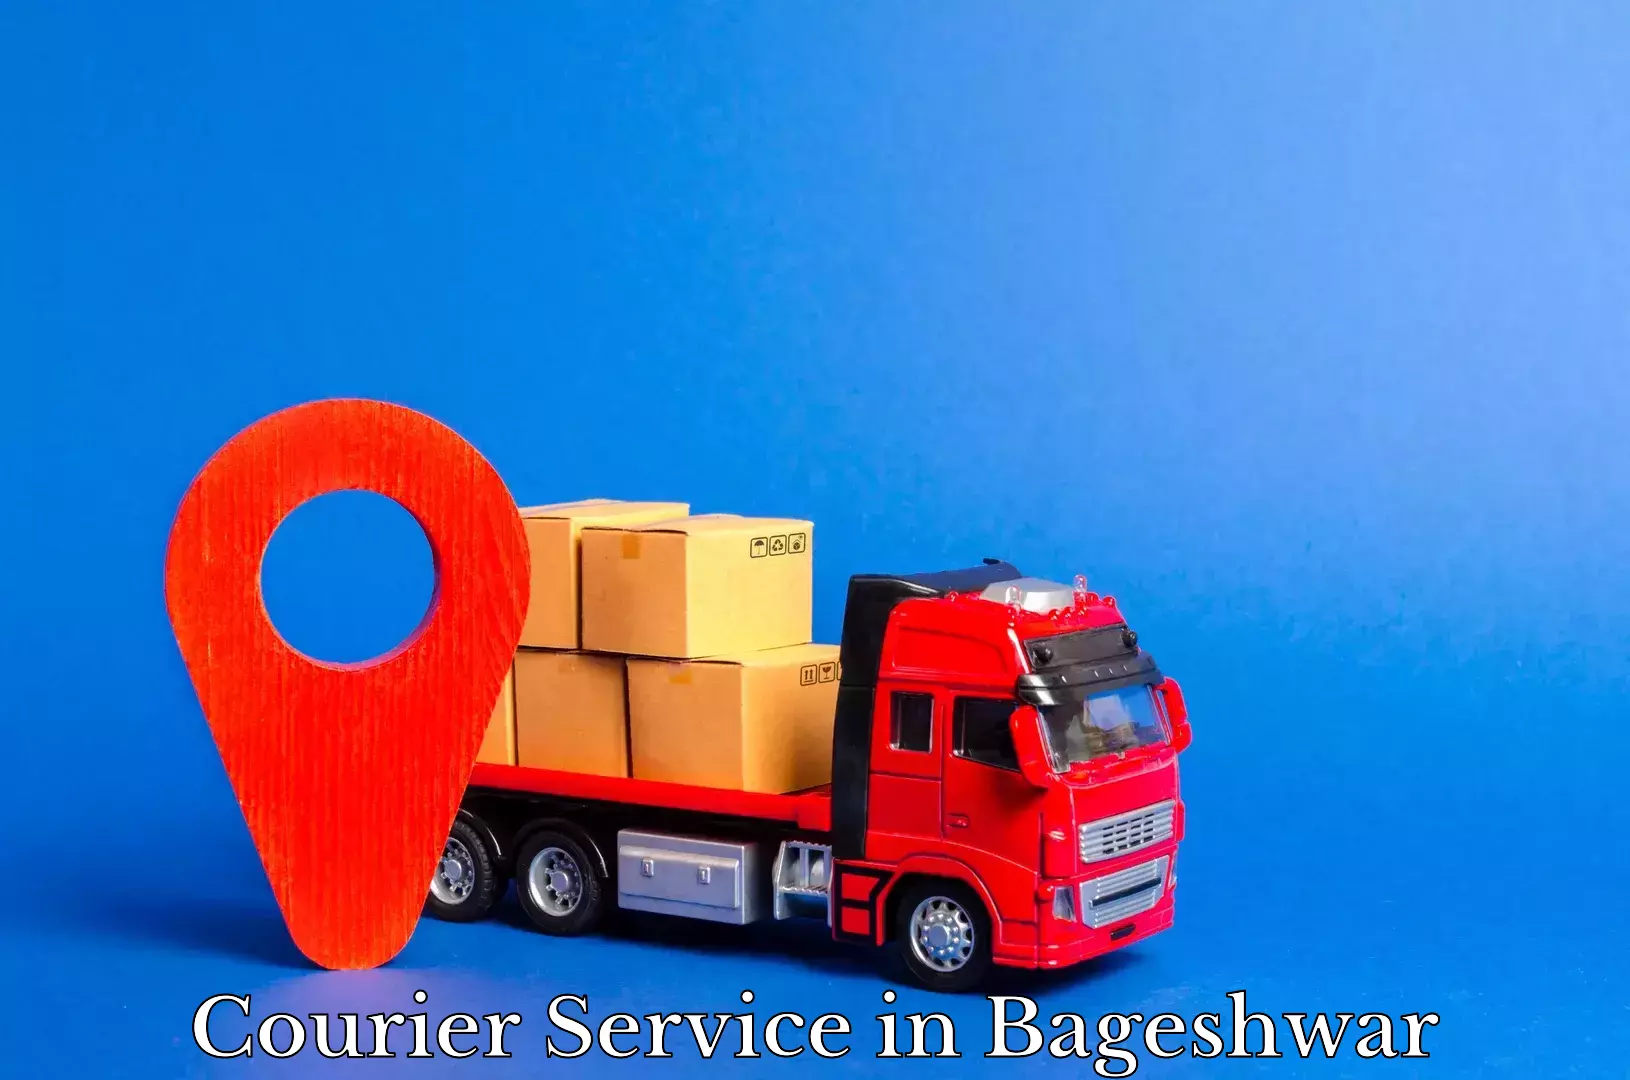 Customizable shipping options in Bageshwar